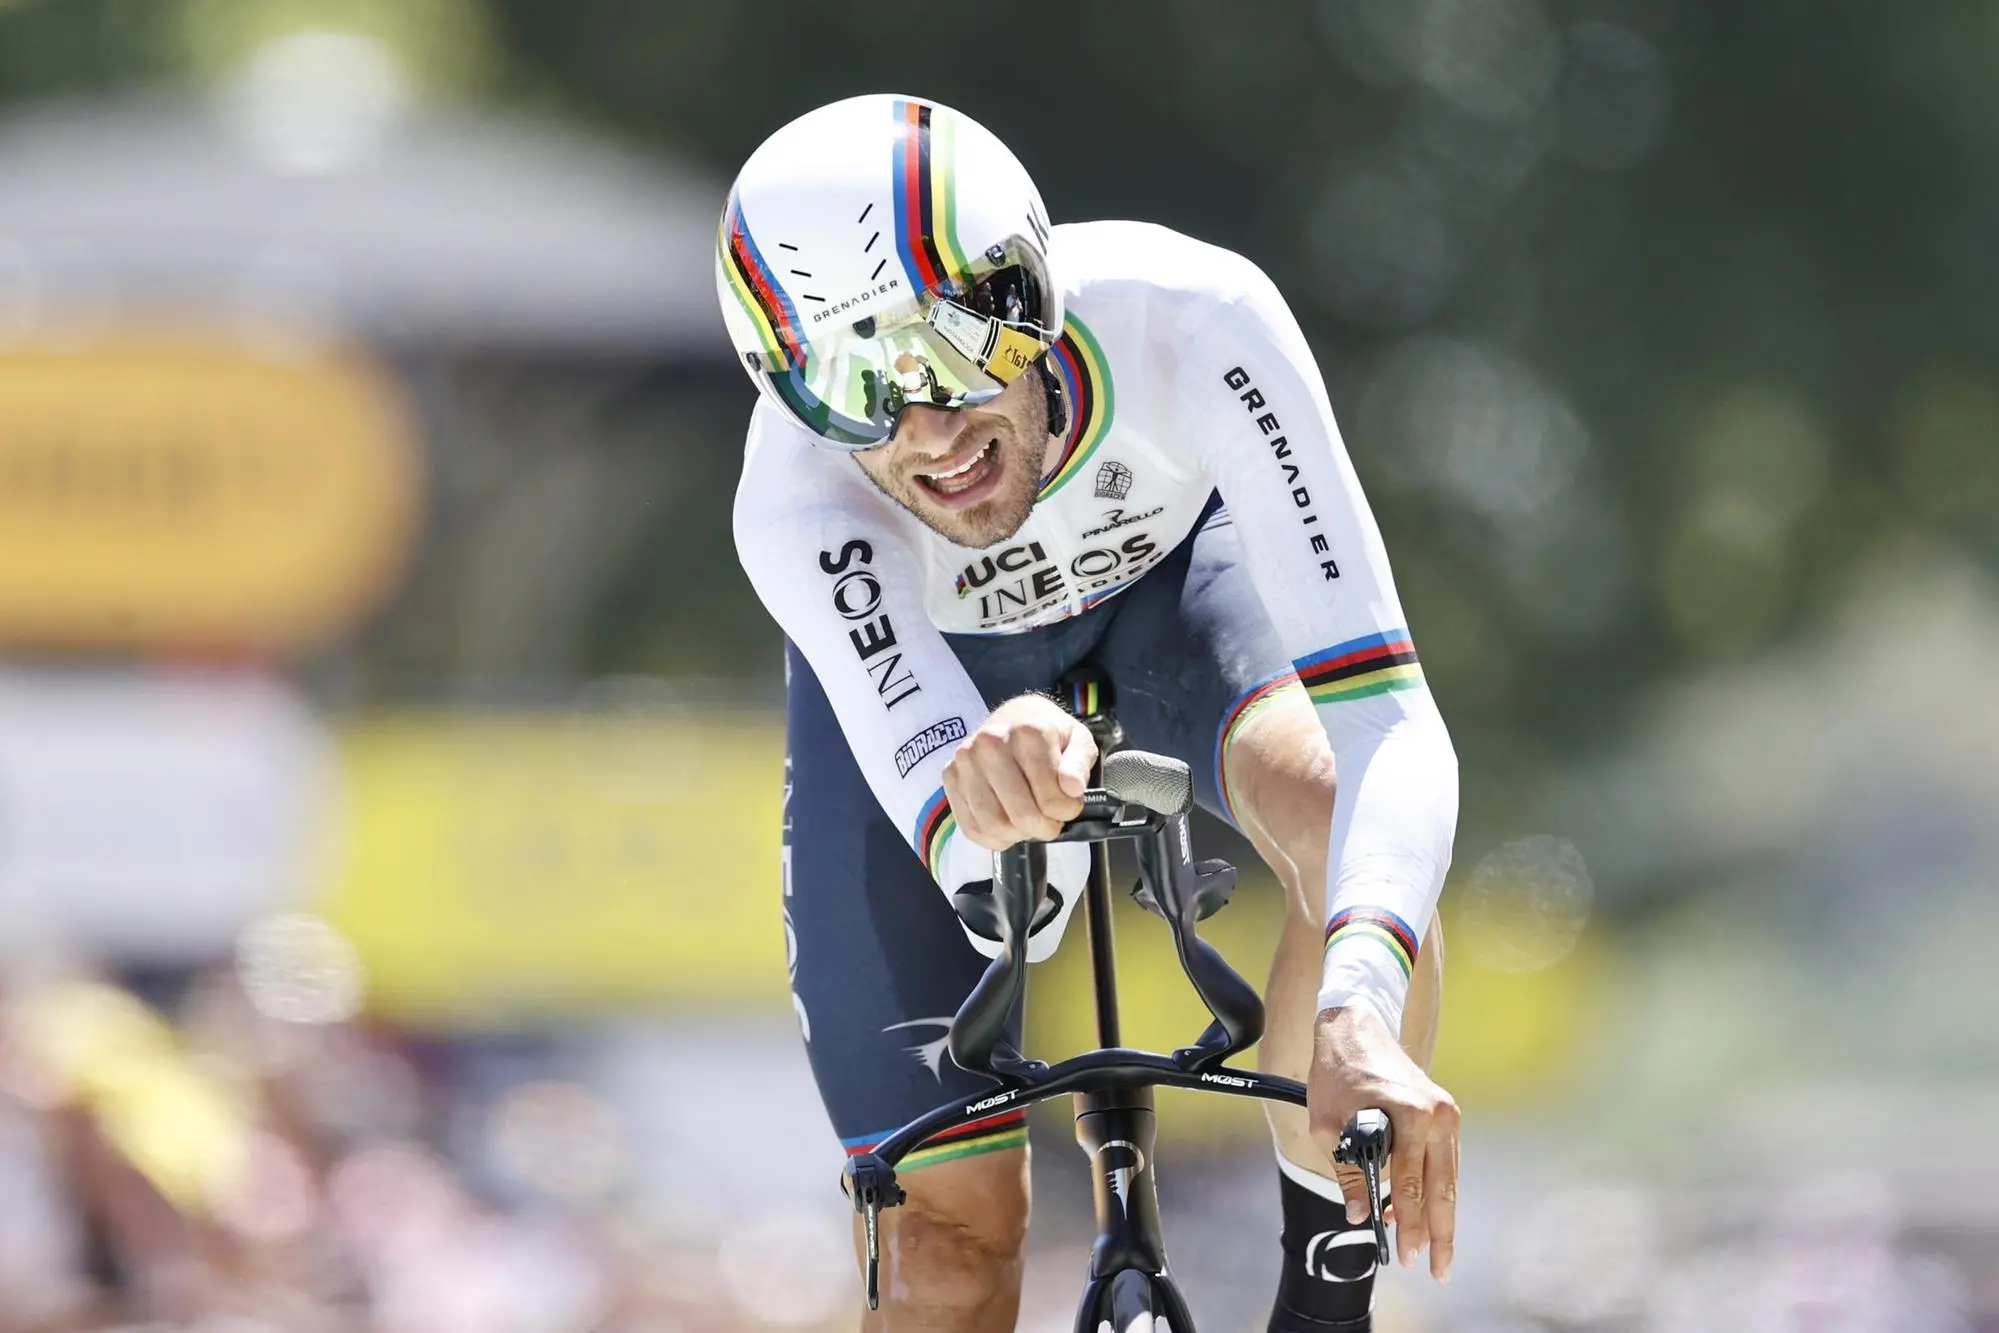 epa10087760 Italian rider Filippo Ganna of Ineos Grenadiers crosses the finish line during the 20th stage of the Tour de France 2022, an individual time trial over 40.7km from Lacapelle-Marival to Rocamadour, France, 23 July 2022. EPA/GUILLAUME HORCAJUELO